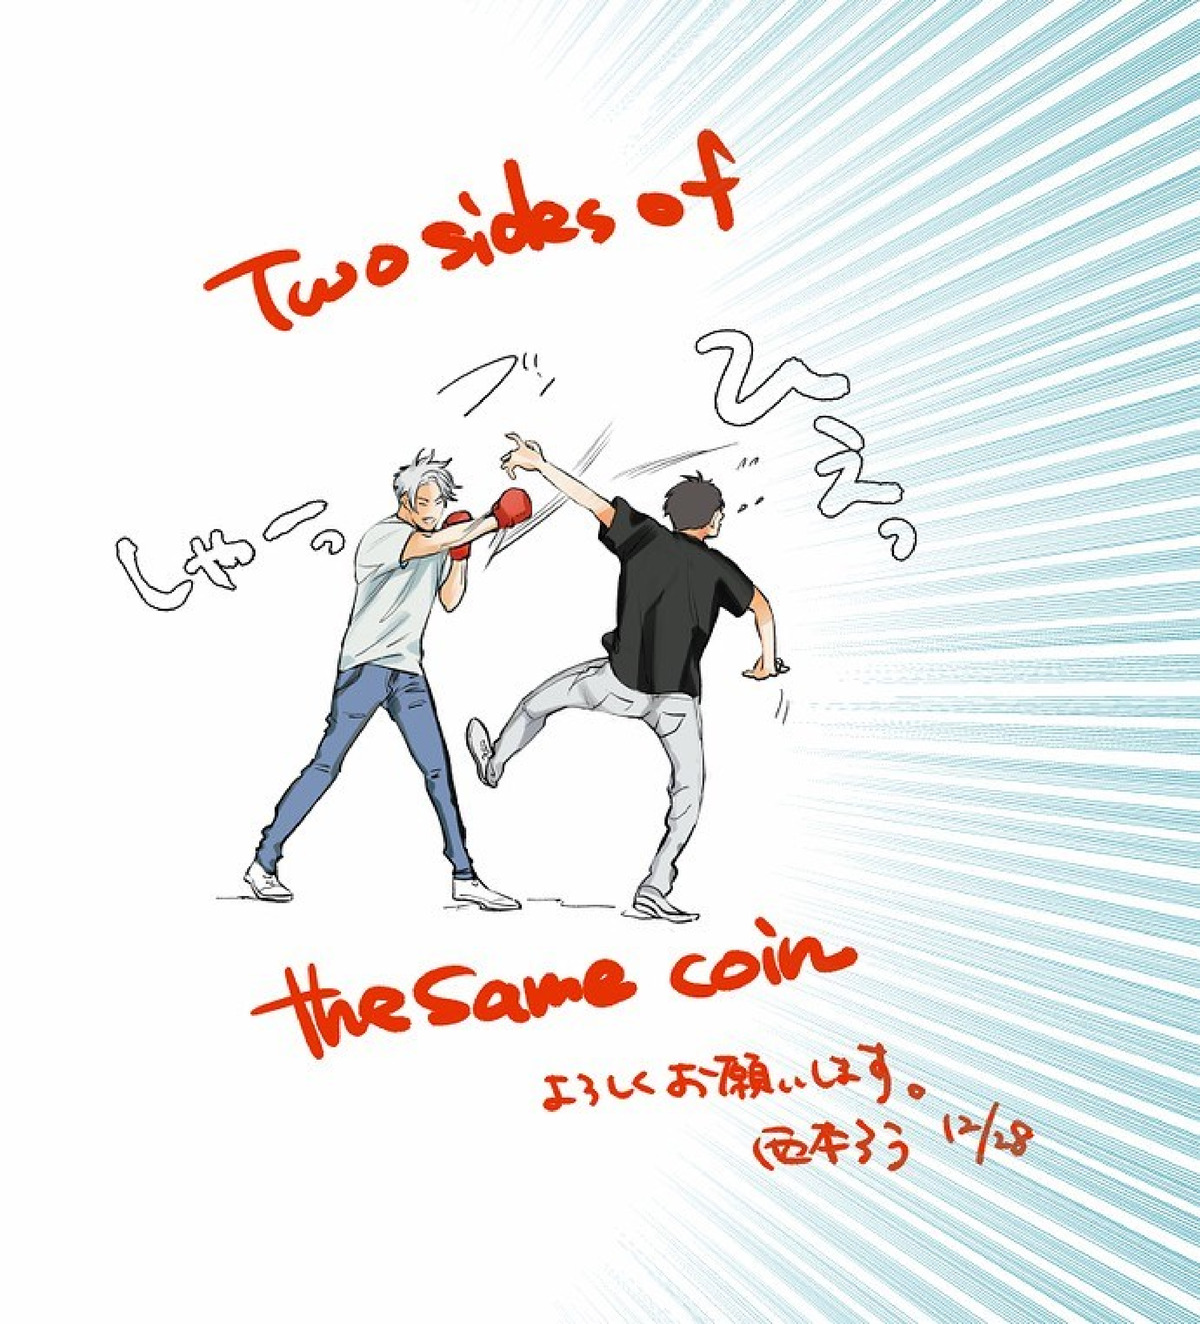 【Two sides of the same coin[腐漫]】漫画-（上卷01-02）章节漫画下拉式图片-59.jpg